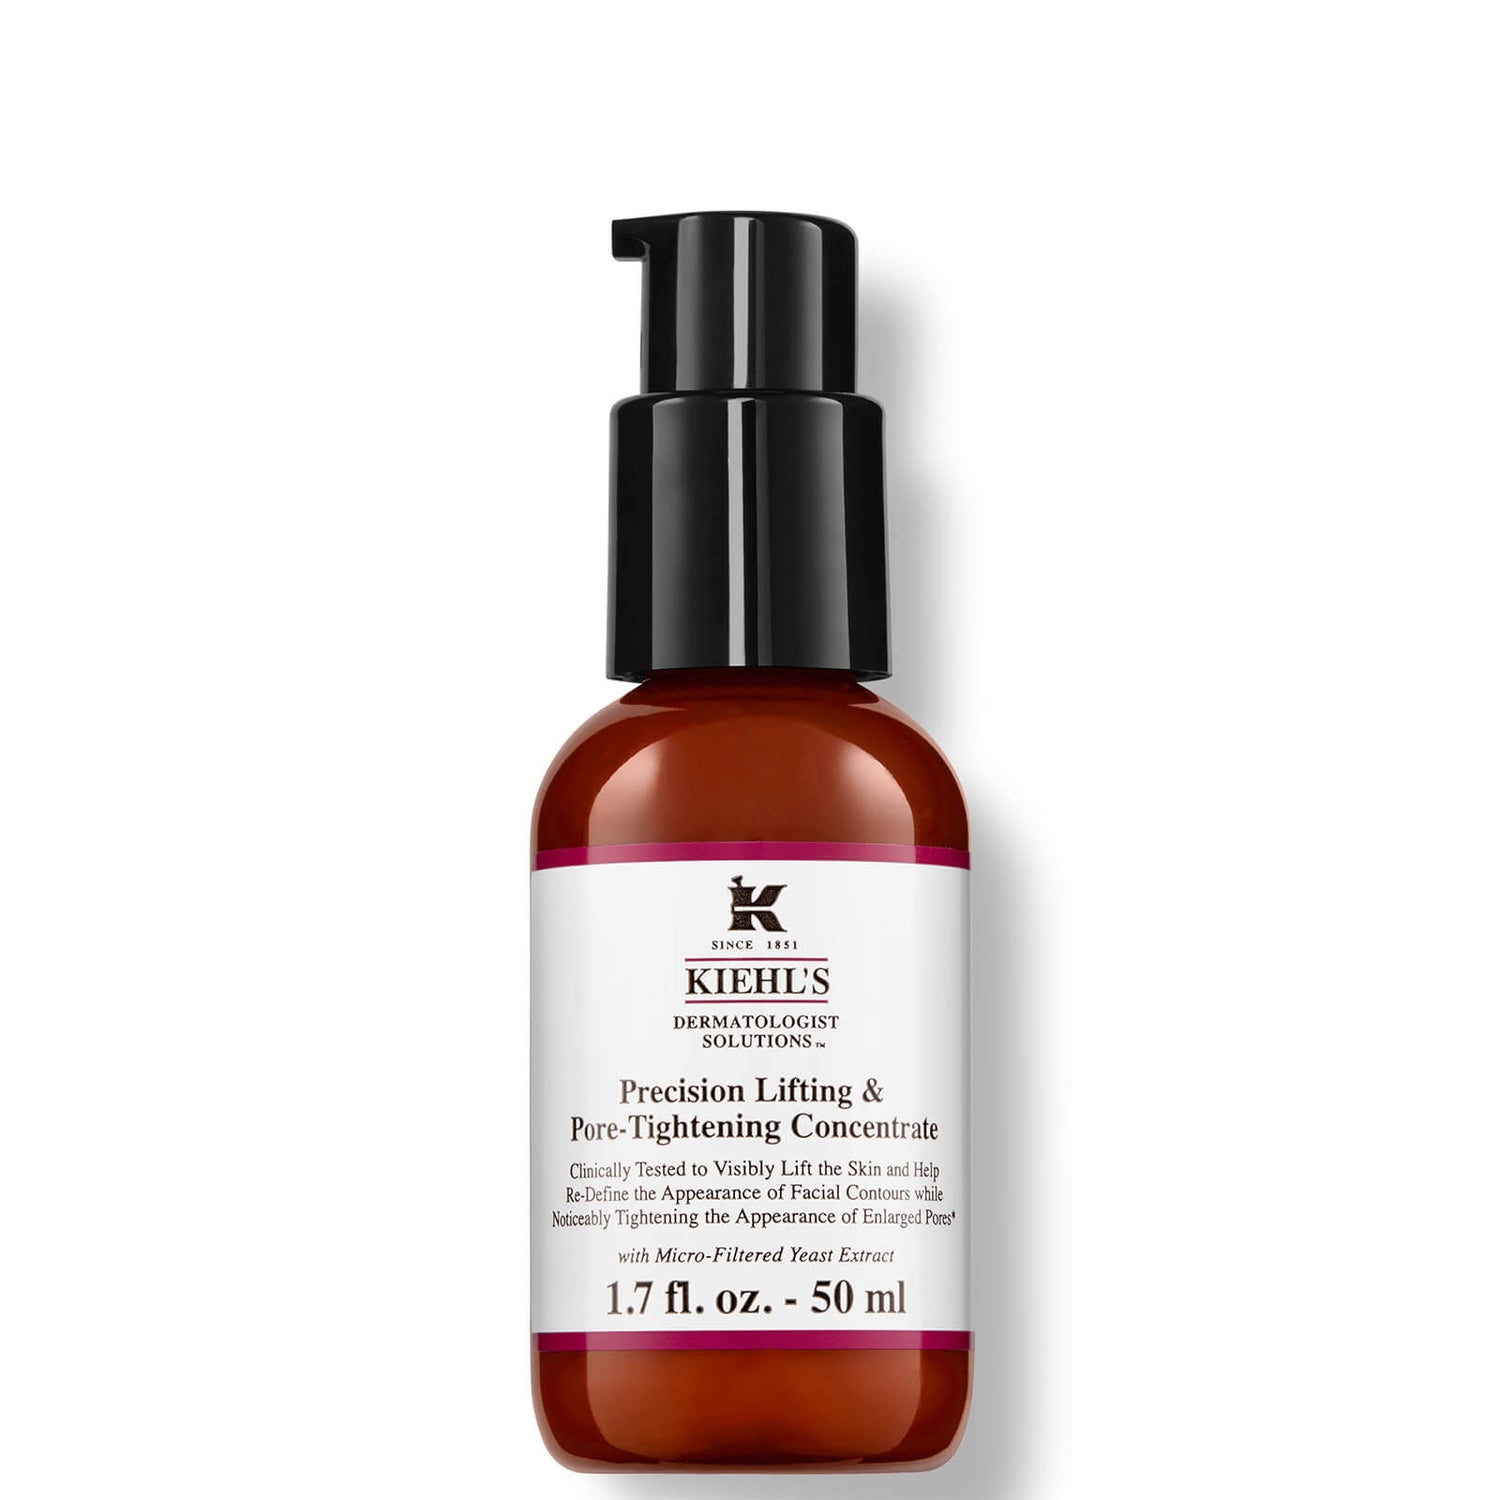 Kiehl's Precision Lifting and Pore-Tightening Concentrate 50ml